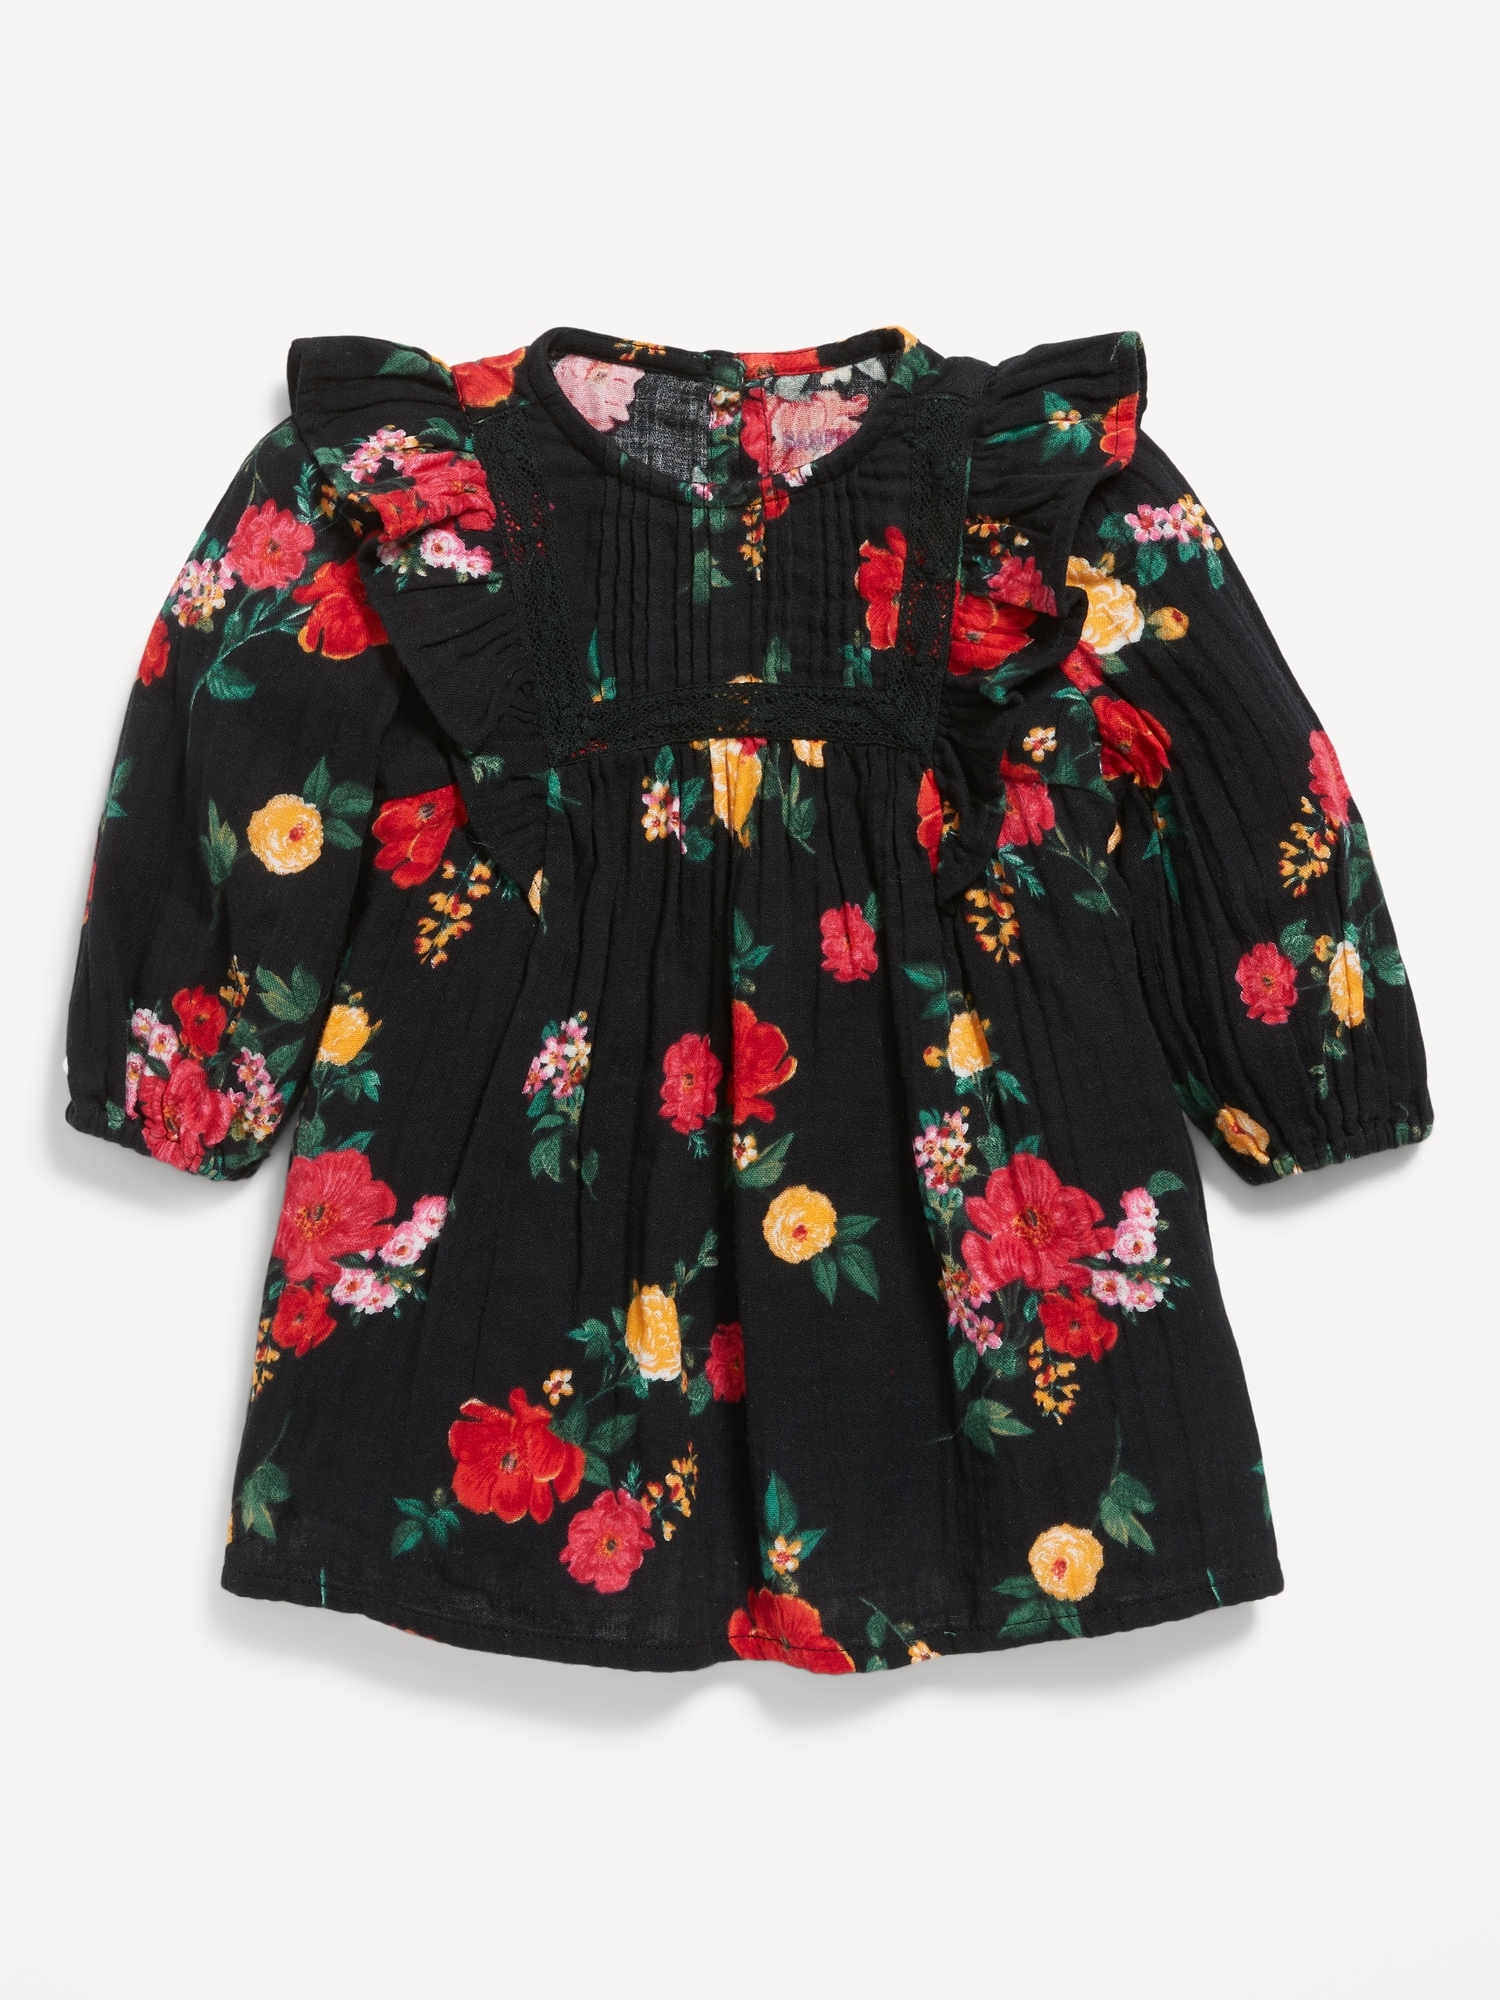 Long-Sleeve Matching Floral-Print Ruffle-Trim Dress for Baby